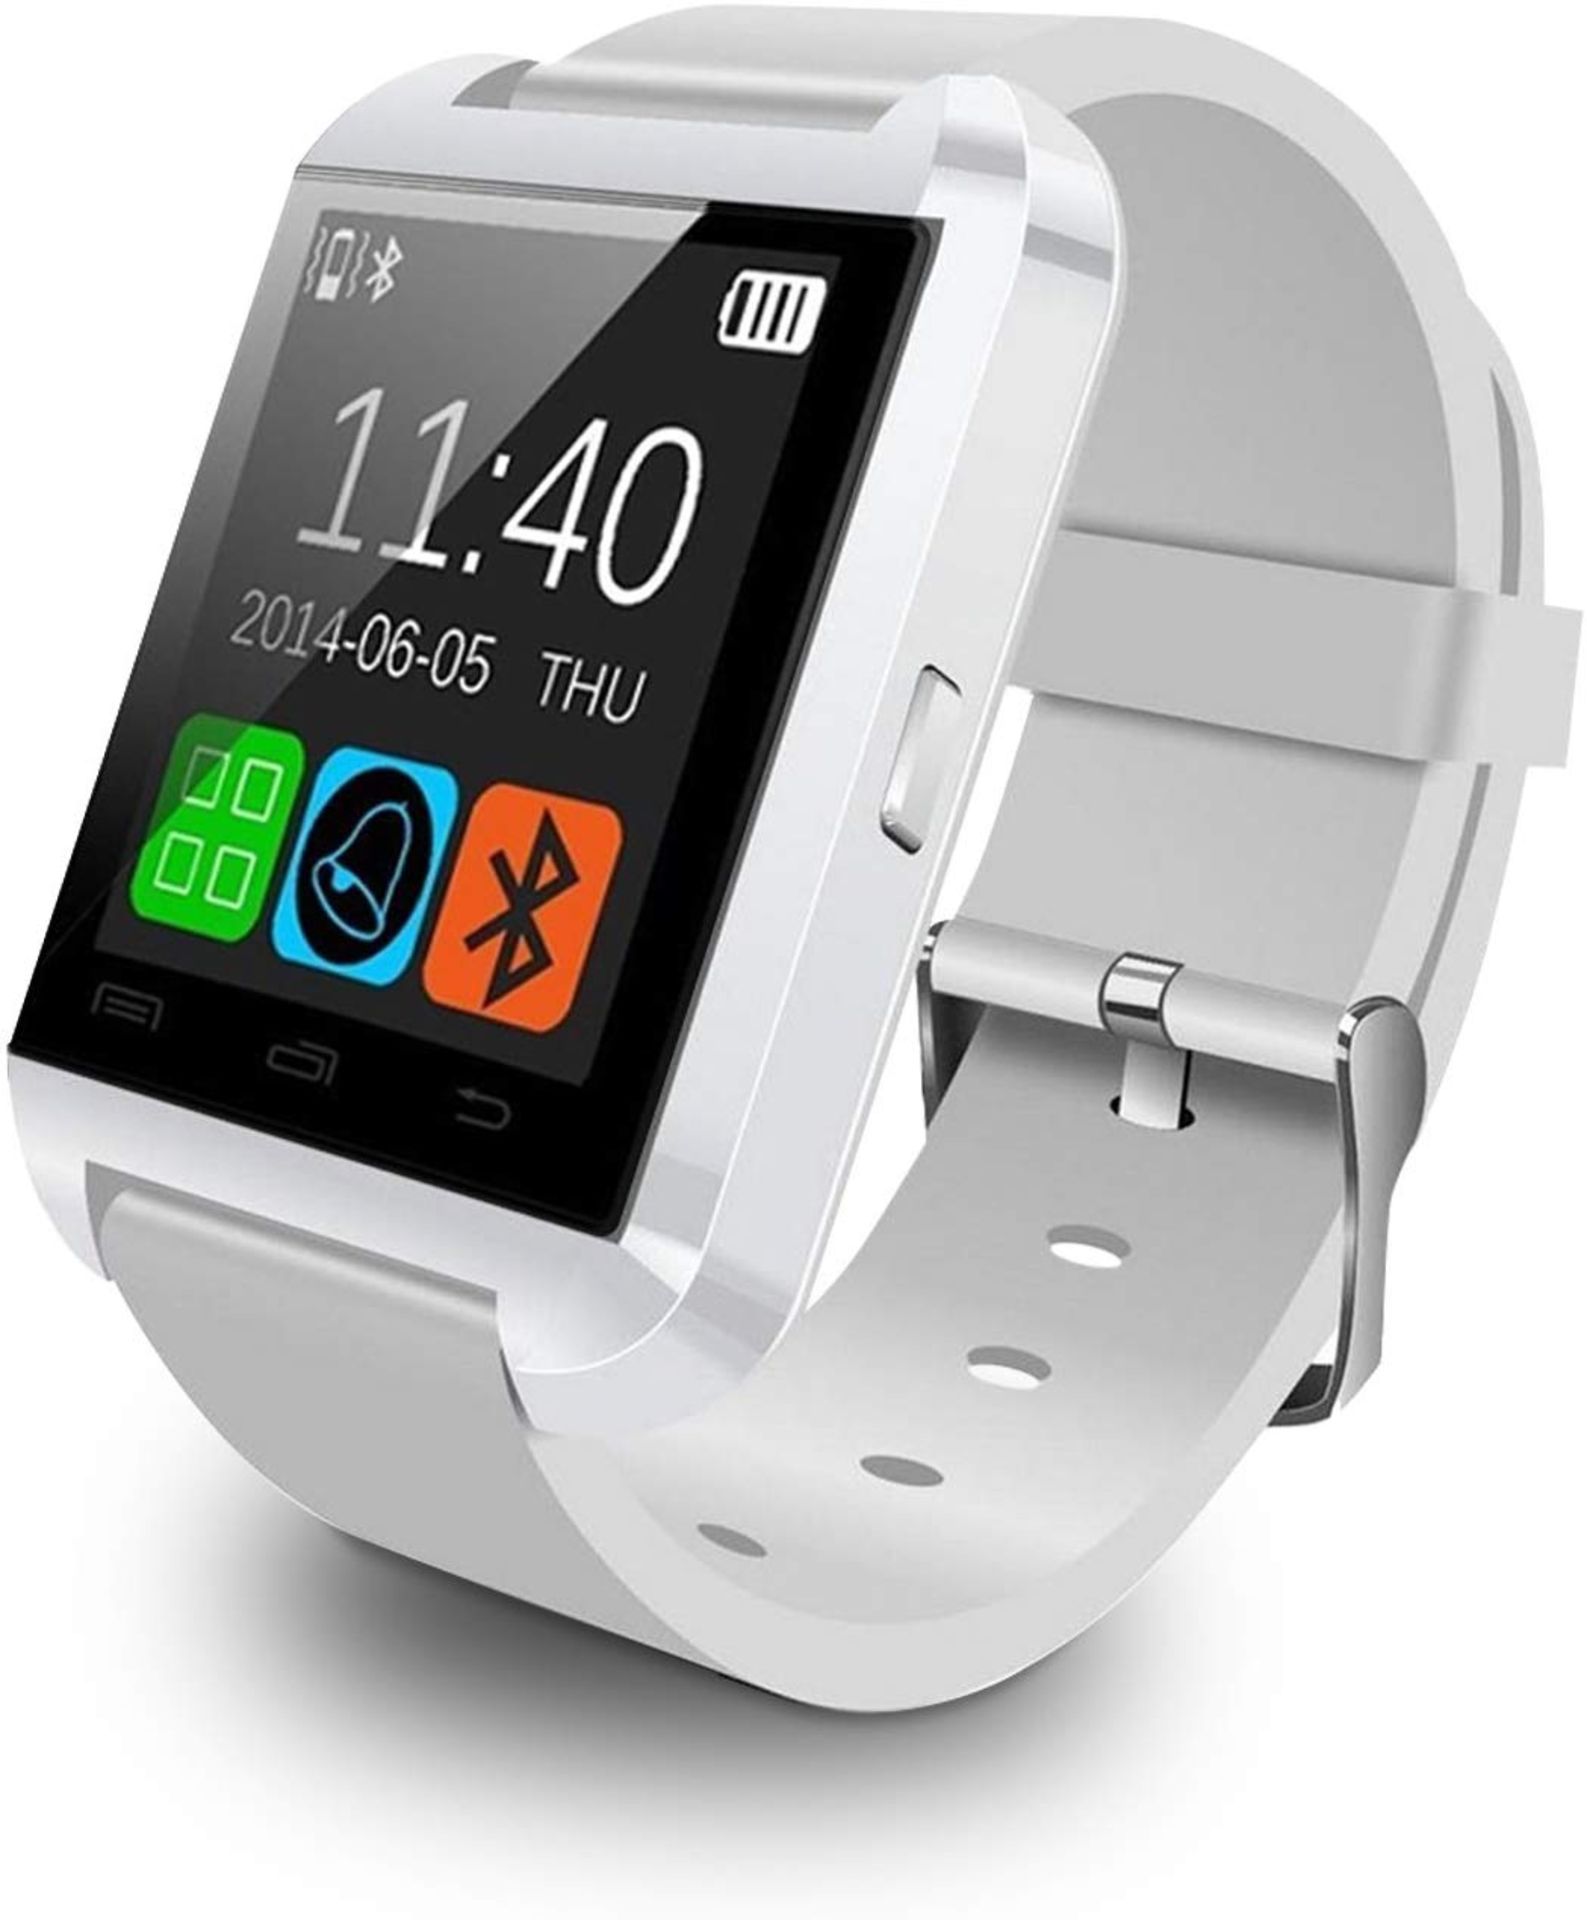 V Brand New In Tech Bluetooth Smart Watch - Receive and Make Calls - Alarm Clock - Pedometer - - Image 4 of 4